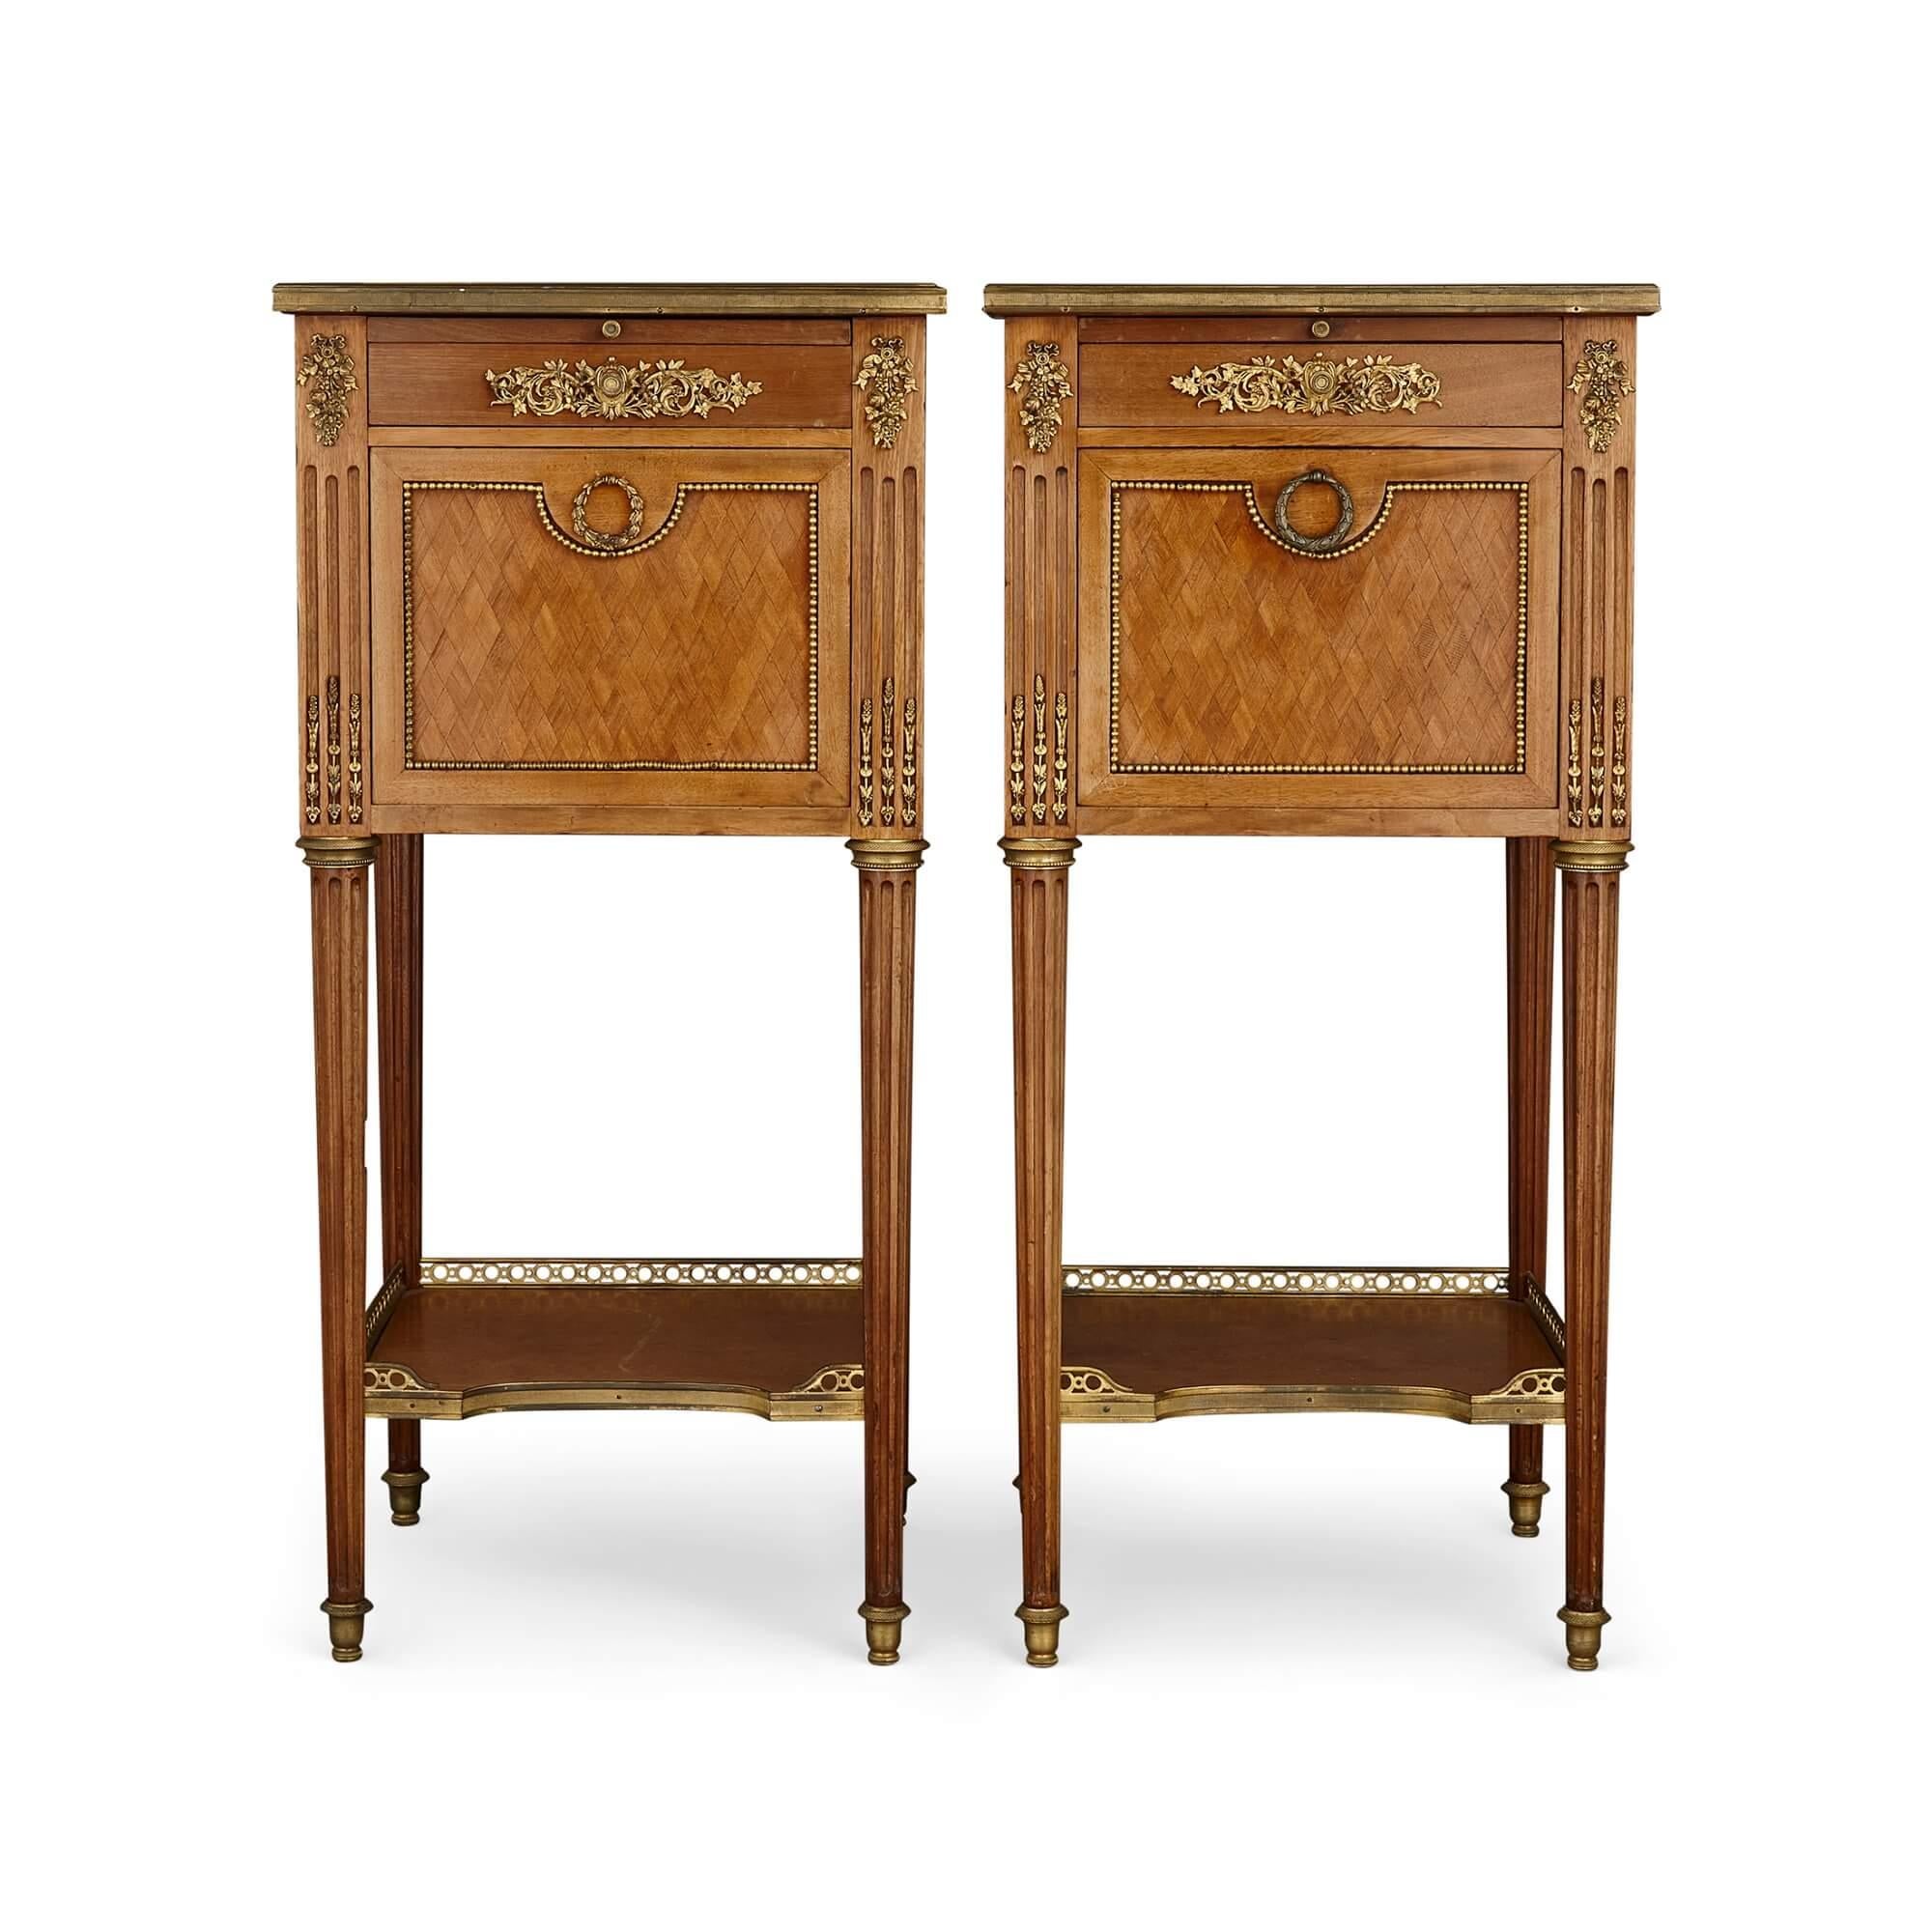 Pair of French mahogany and ormolu bedside cabinets 
French, 20th century 
Height 85cm, width 40cm, depth 40cm

Designed in the Louis XVI style, these bedside cabinets are superbly crafted out of an array of materials. 

Richly veined grey and